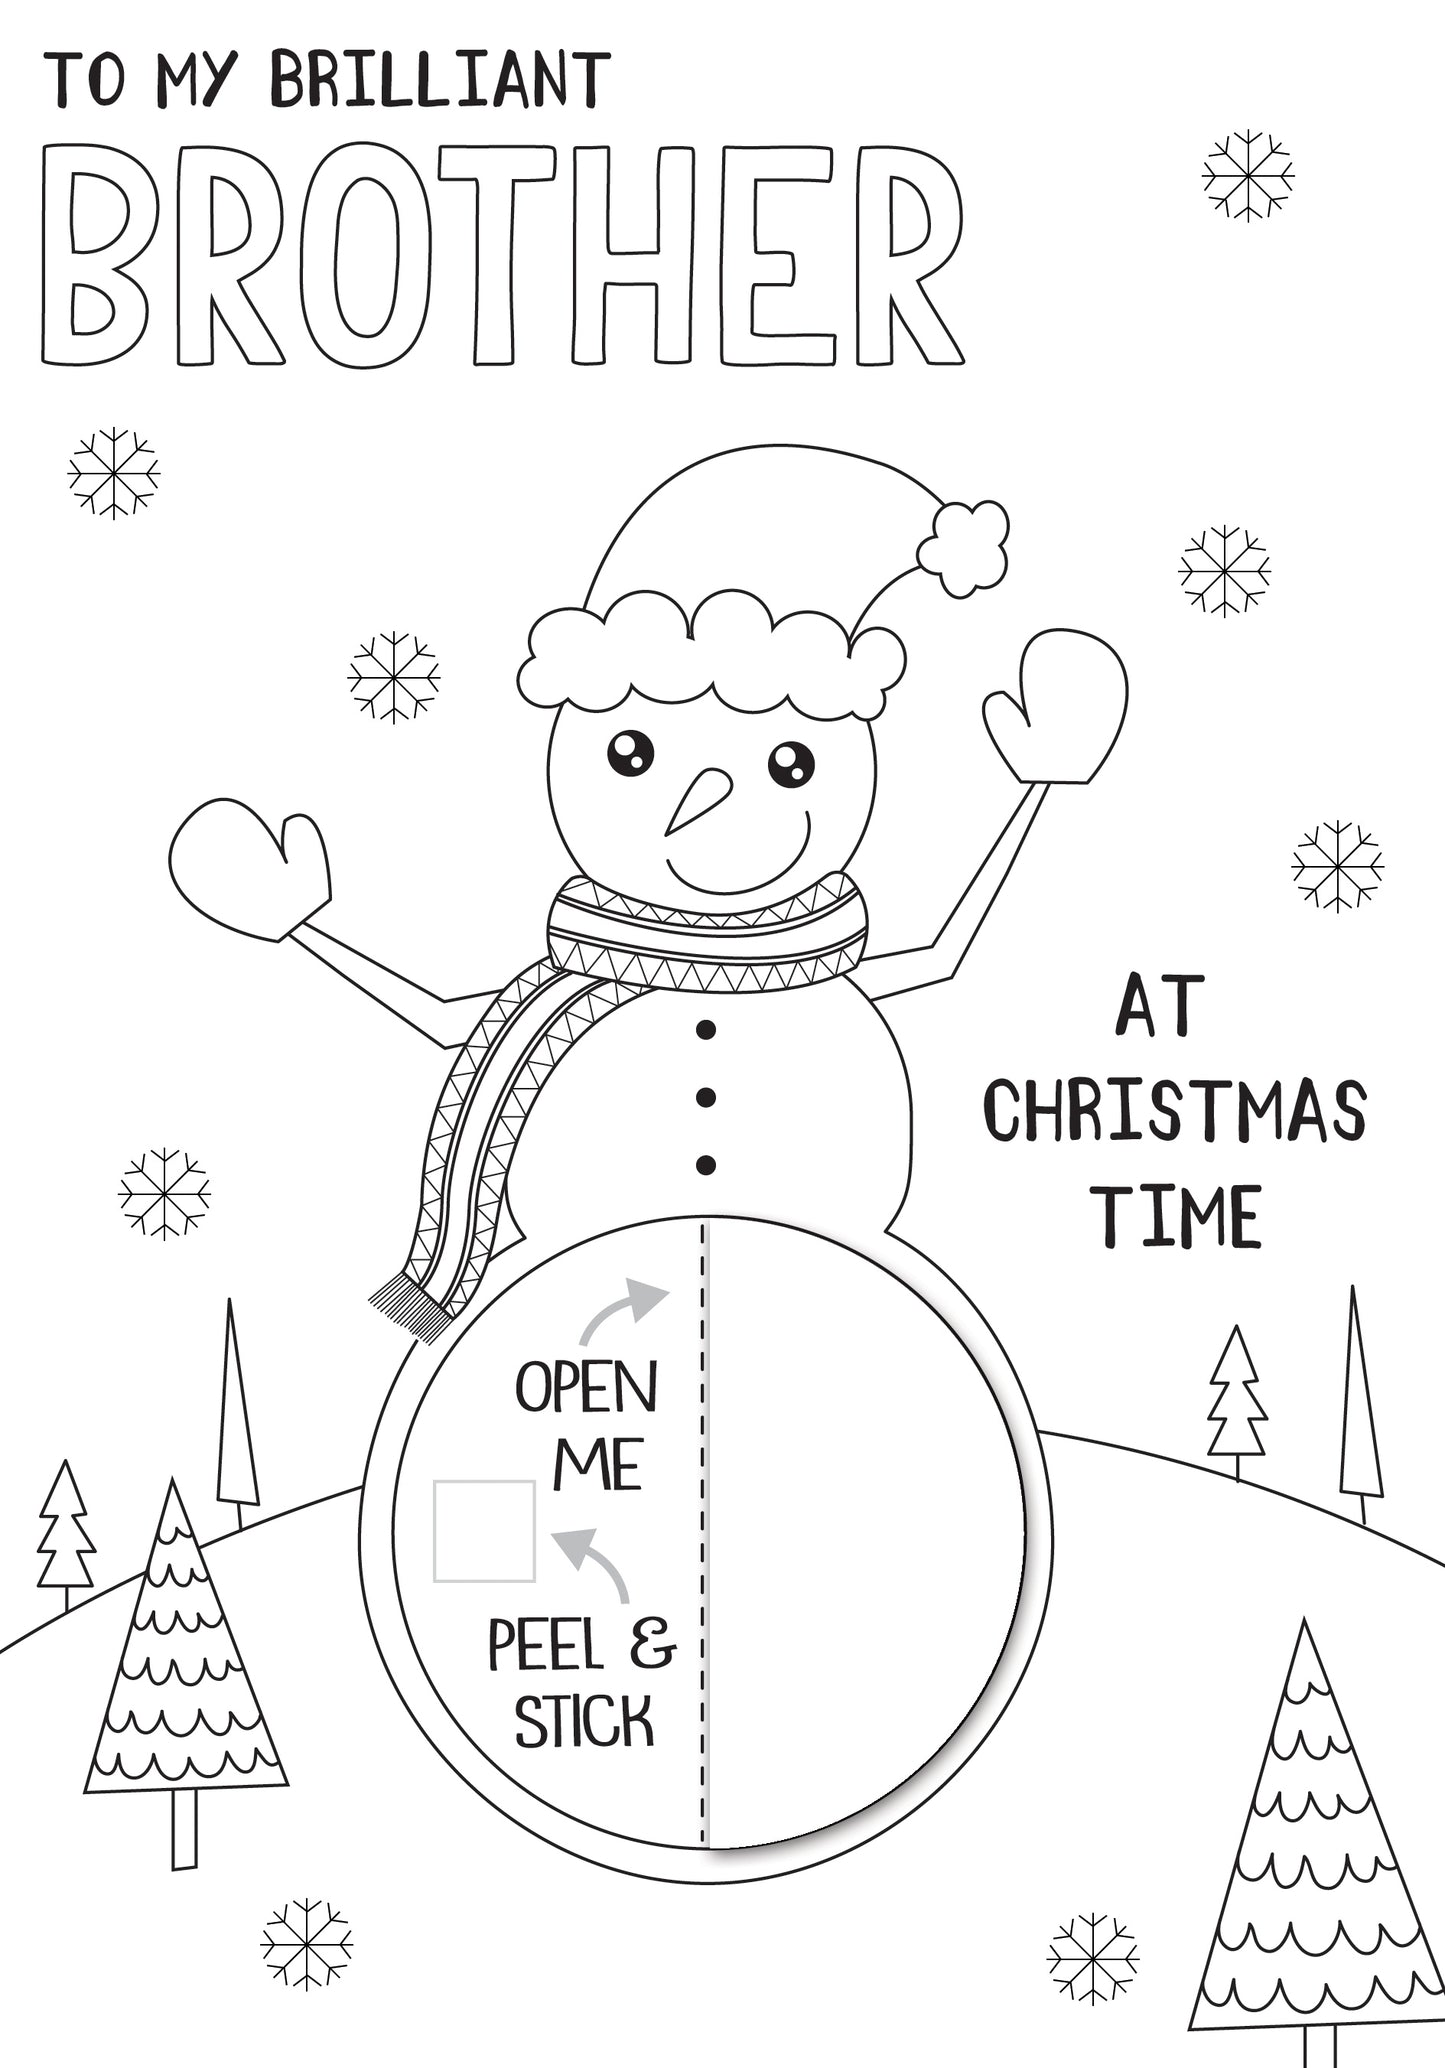 Brilliant Brother Colour-Me-In Christmas Greeting Card